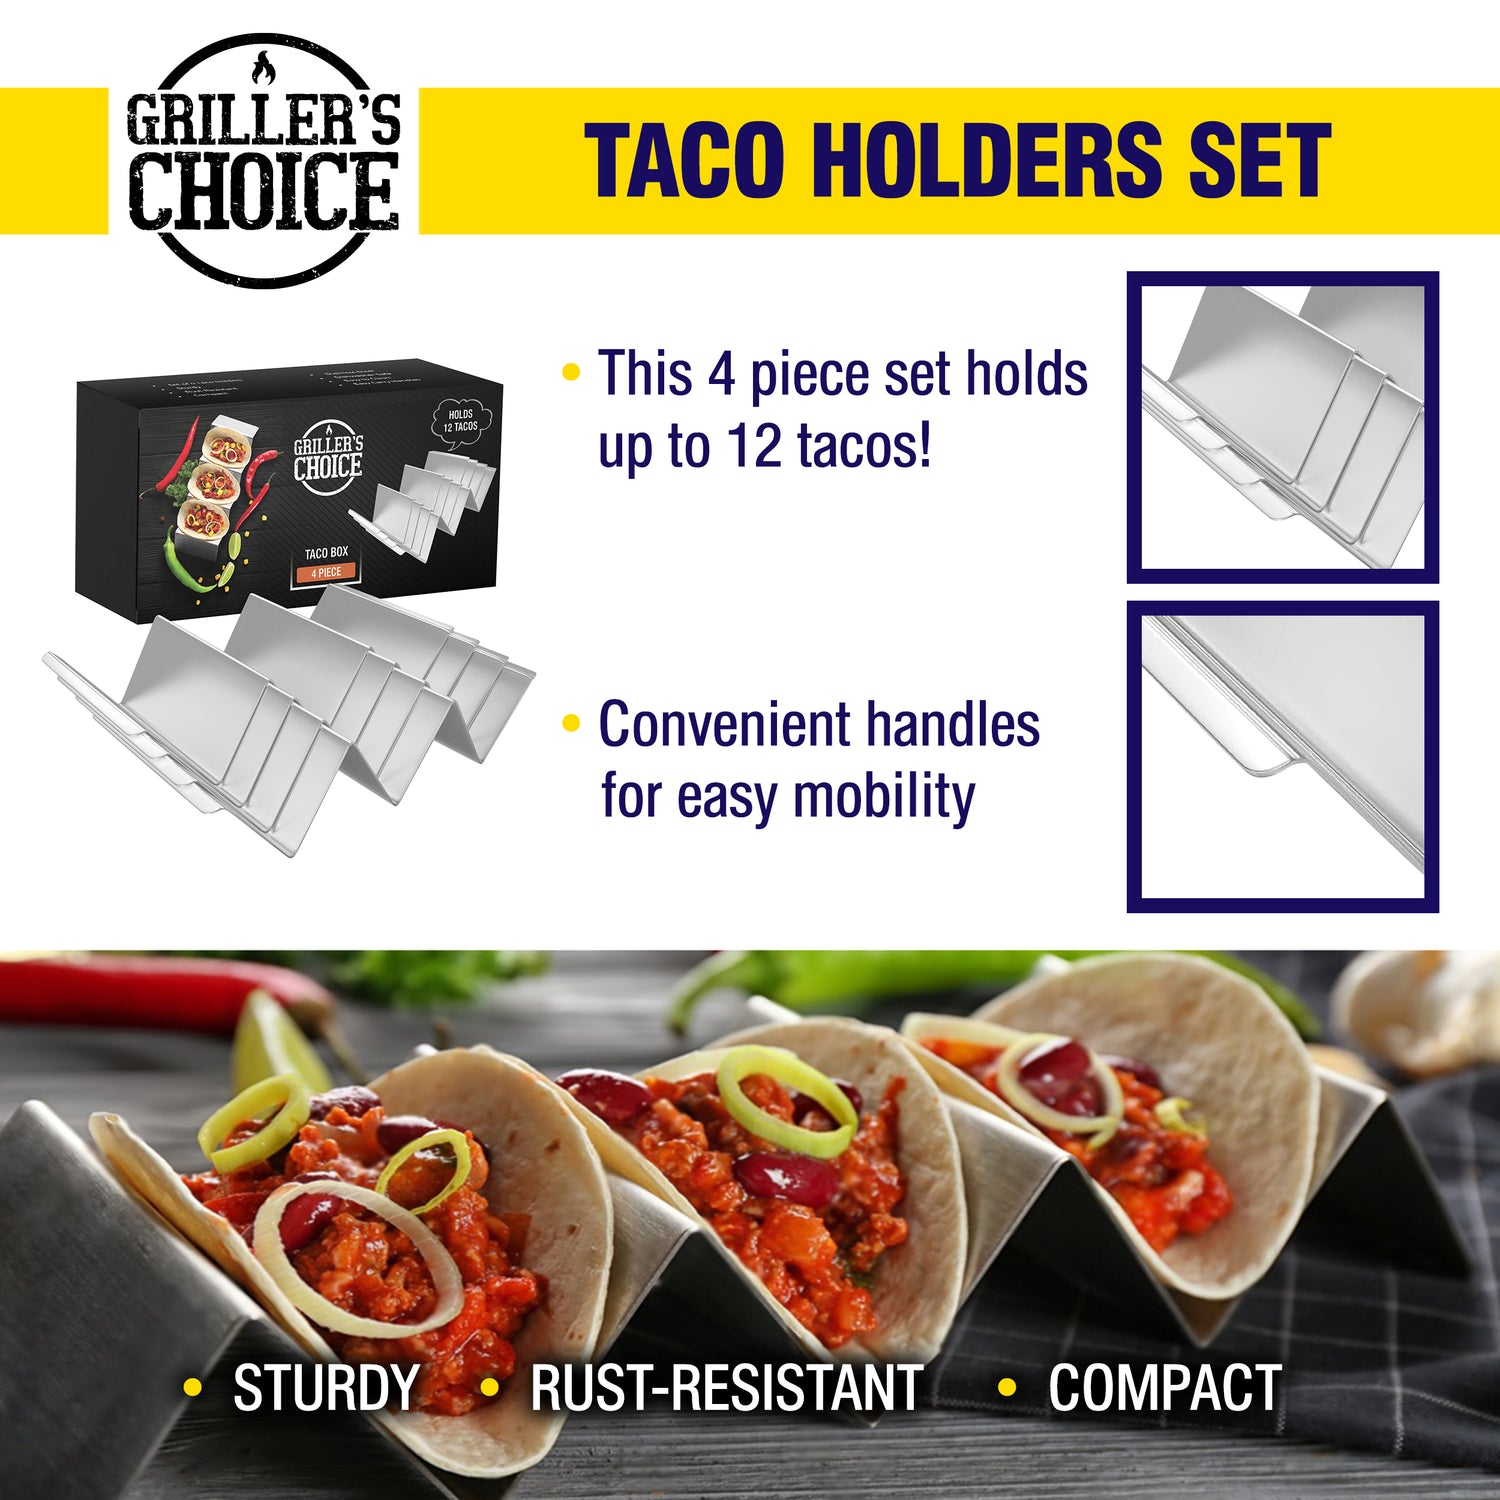 Tuesday Stainless Steel 4-Piece Taco Holder Tray Set, Holds Up to 12  Shells, Dishwasher, Oven and Grill Safe, Use As Baking Rack